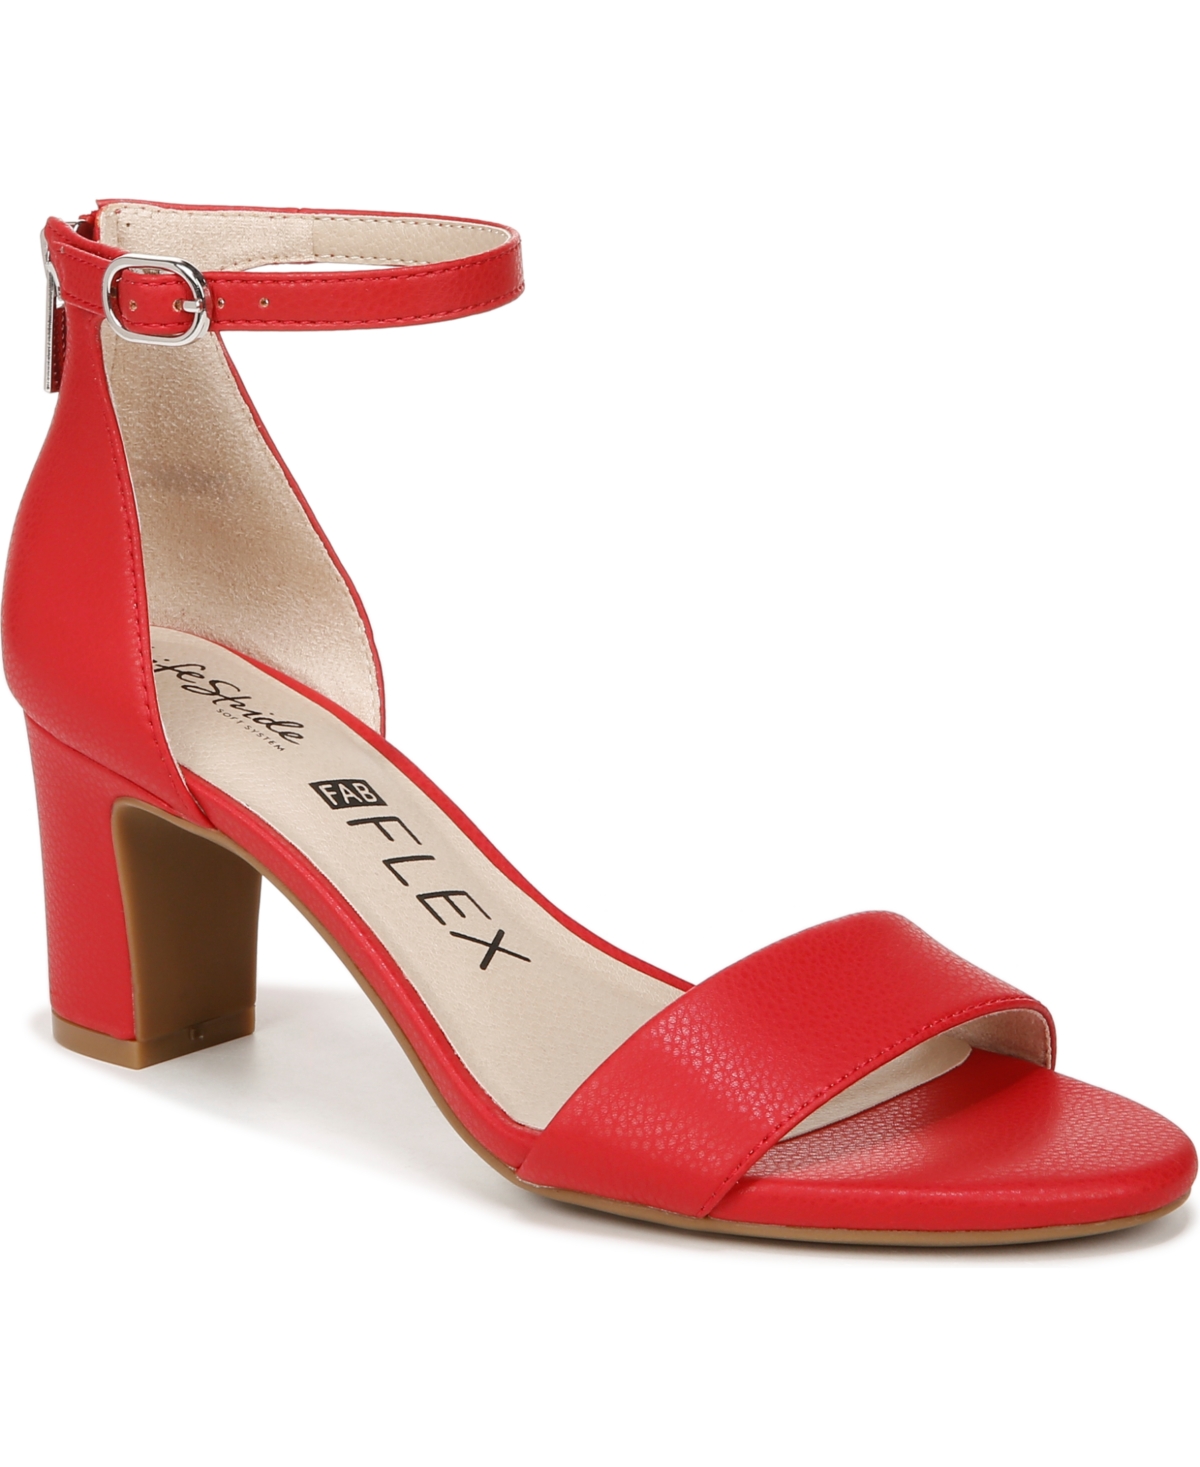 Lifestride Florence Ankle Strap Sandal In Fire Red Faux Leather